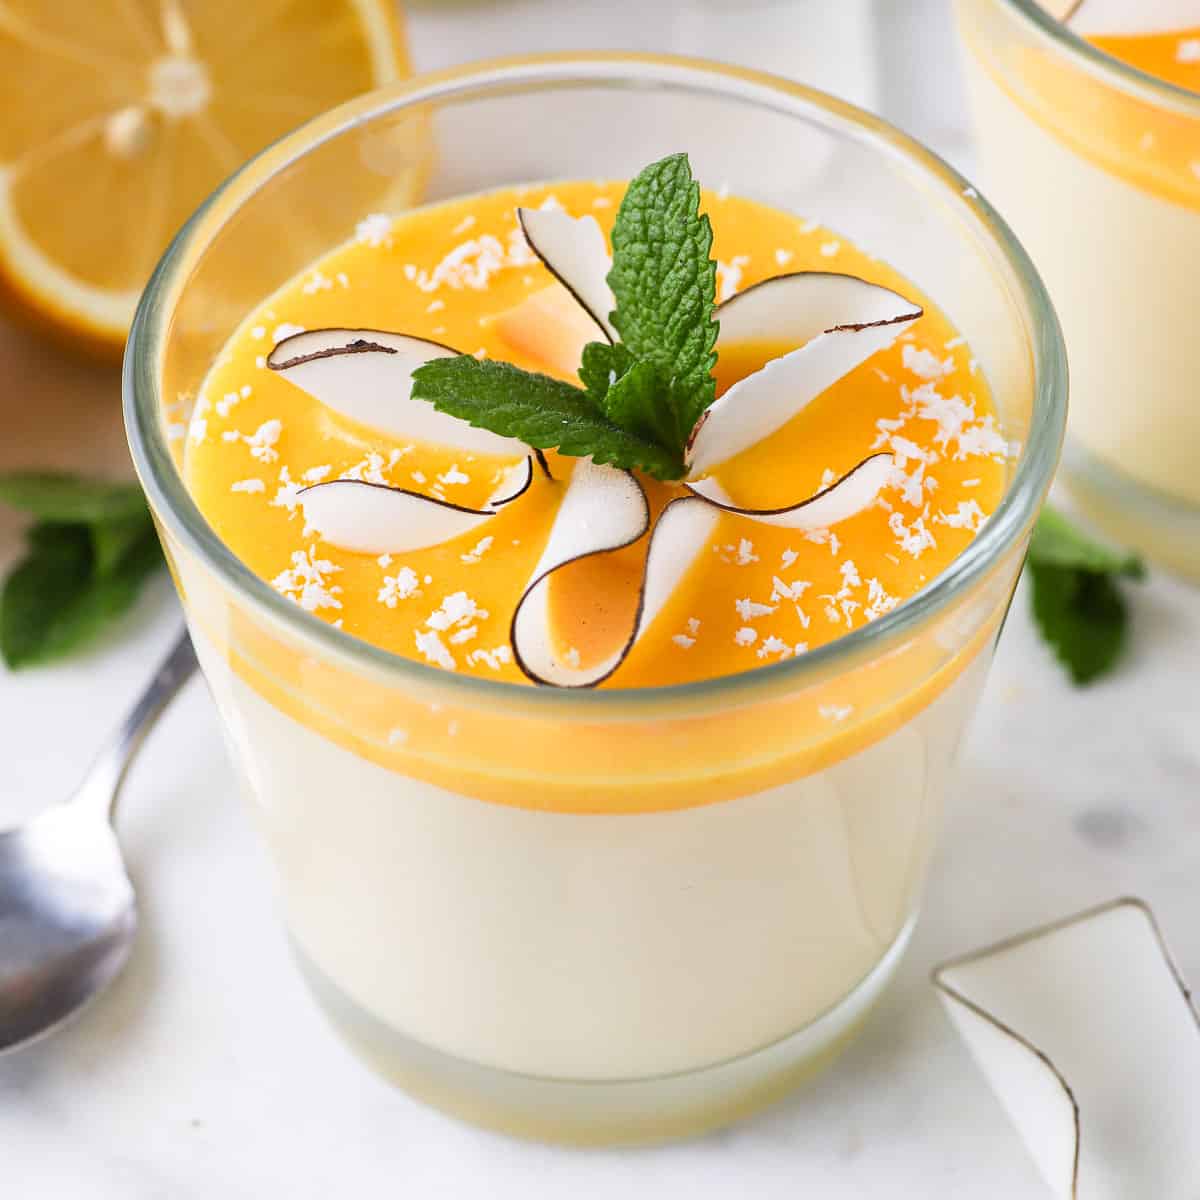 Close up on the Lemon Mousse in a glass cup.